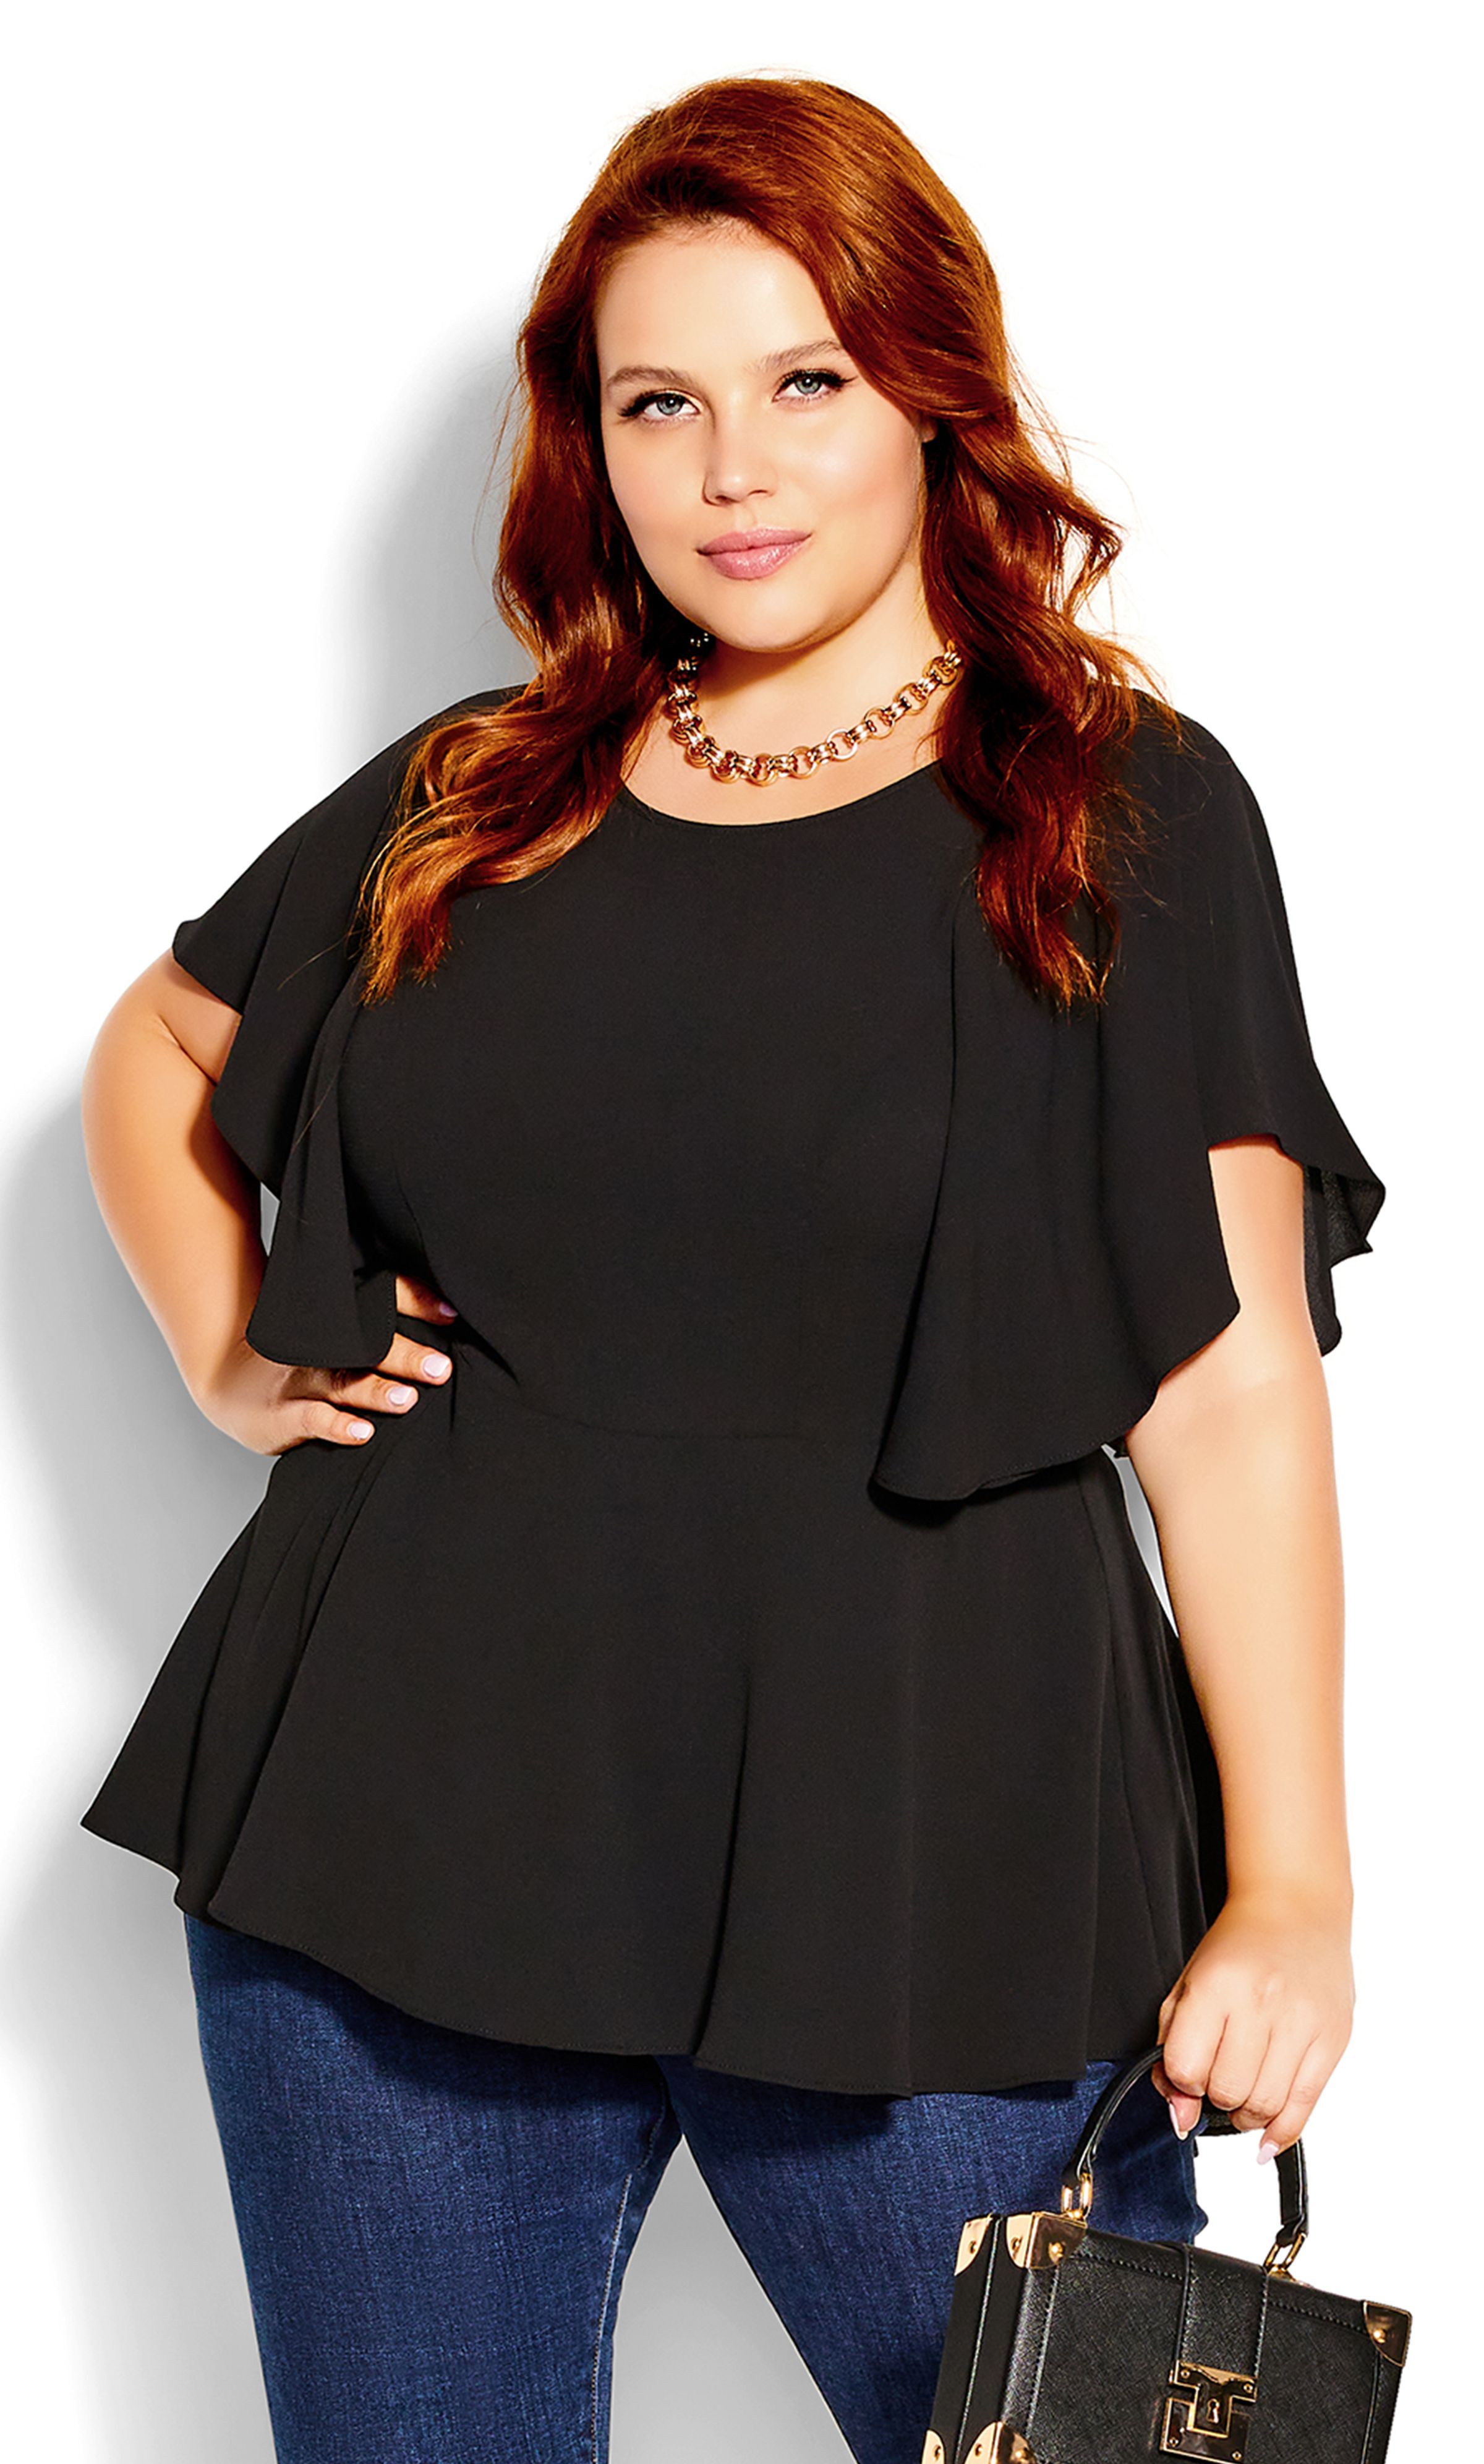 Set the mood in the feminine stylings of our Romantic Mood Top. Offering a flattering flared silhouette and floaty flutter sleeves, this top adds a touch of flirtation to any outfit! Key Features Include: - Round neckline - Floaty open short sleeve - Fitted waist - Peplum shape - Hi-lo hemline - Low V back - Lightweight woven fabrication - Unlined For elevated work wear, style this top with tailored trousers and pumps. Spice it up for the evening with leather look trousers and minimalist heels.